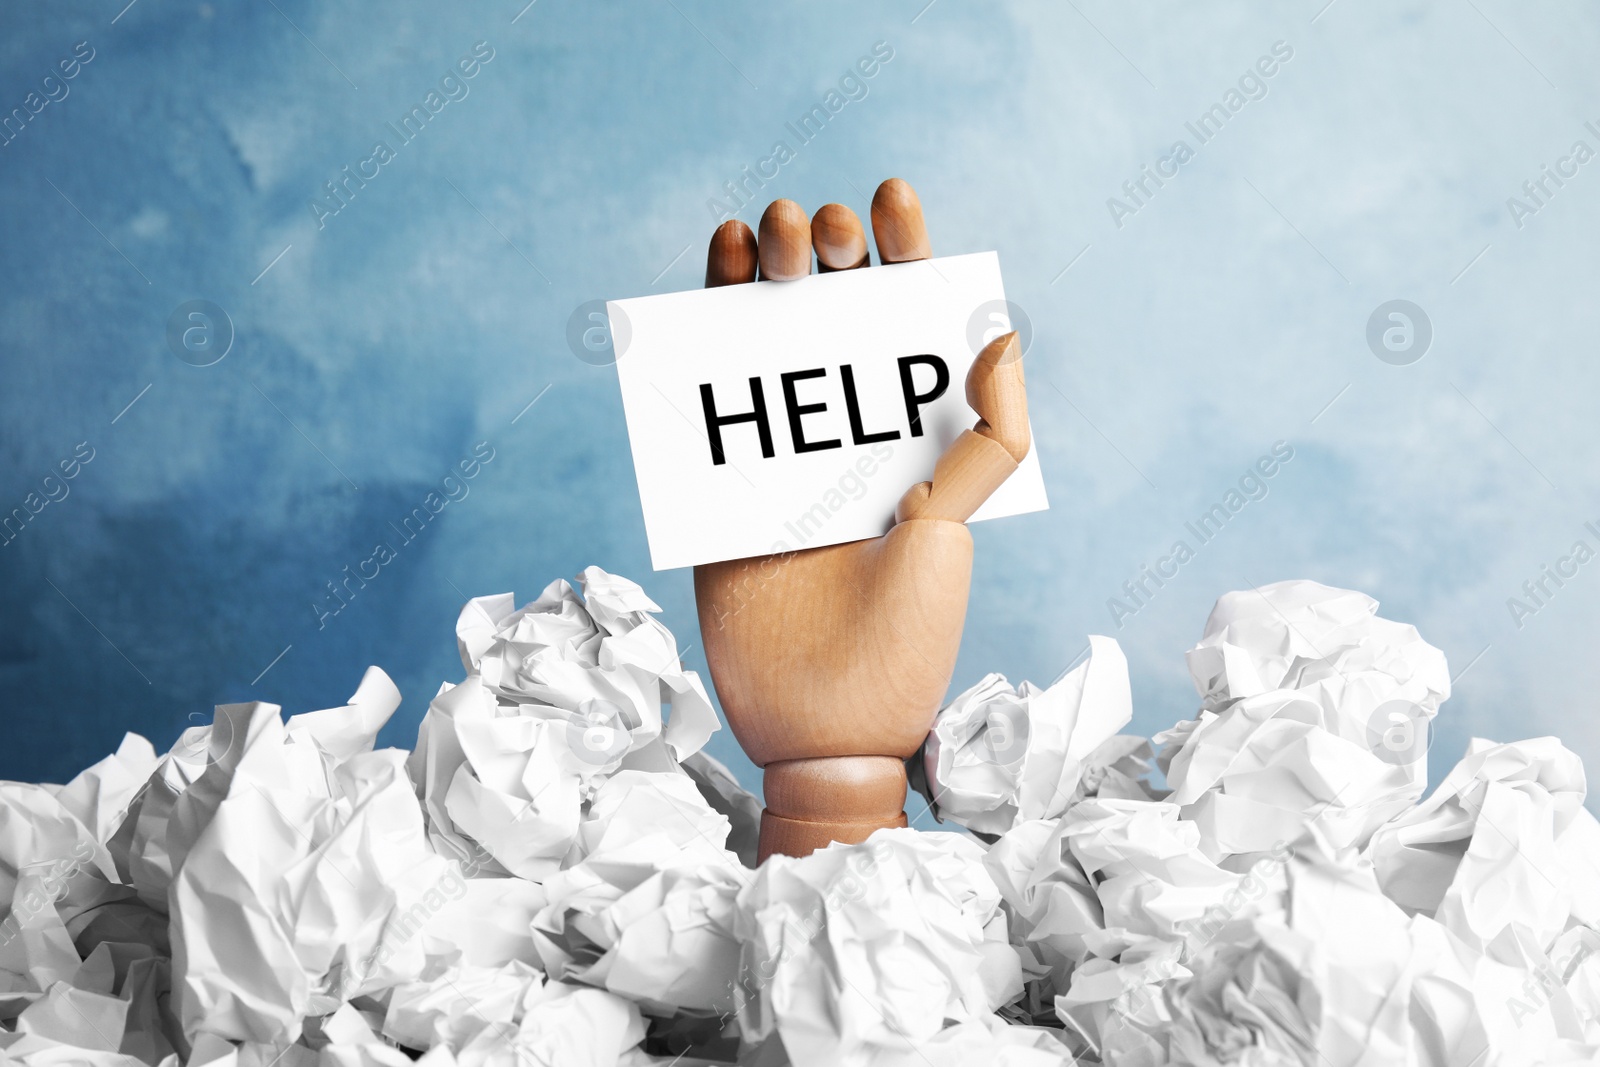 Photo of Wooden hand holding card with word "HELP" among crumpled paper against color background